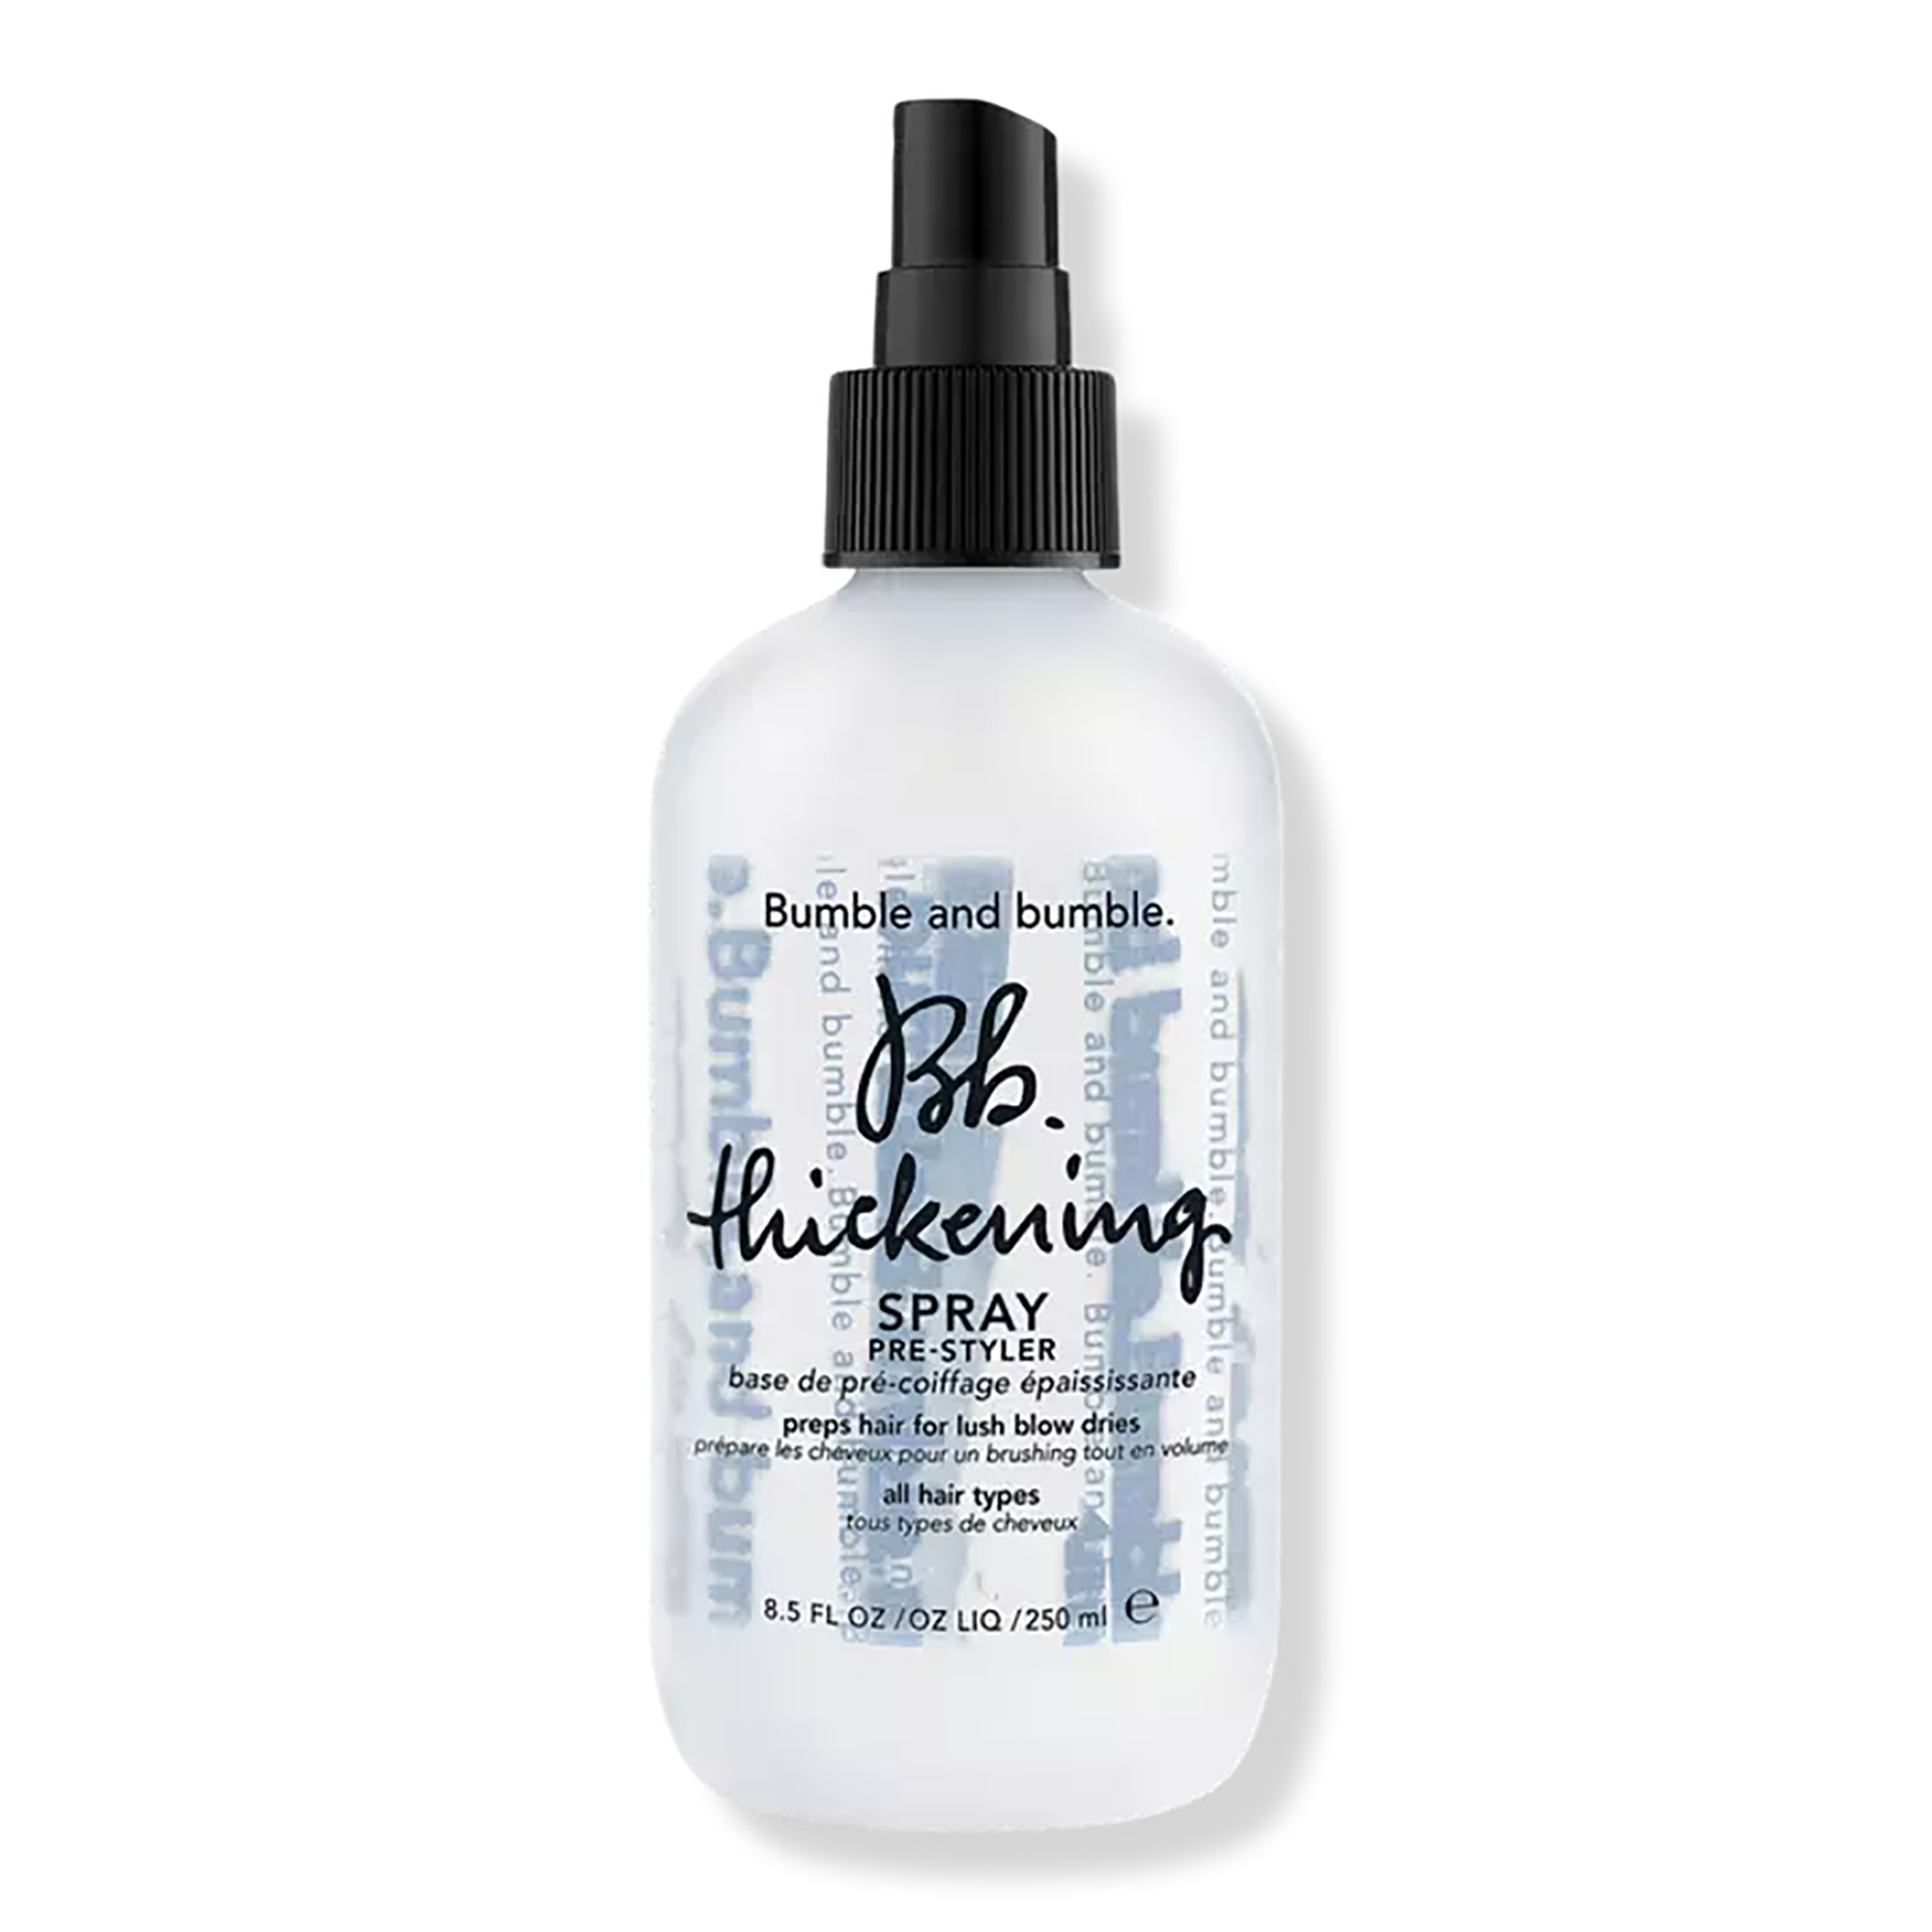 Bumble and bumble Thickening Hairspray / 8OZ